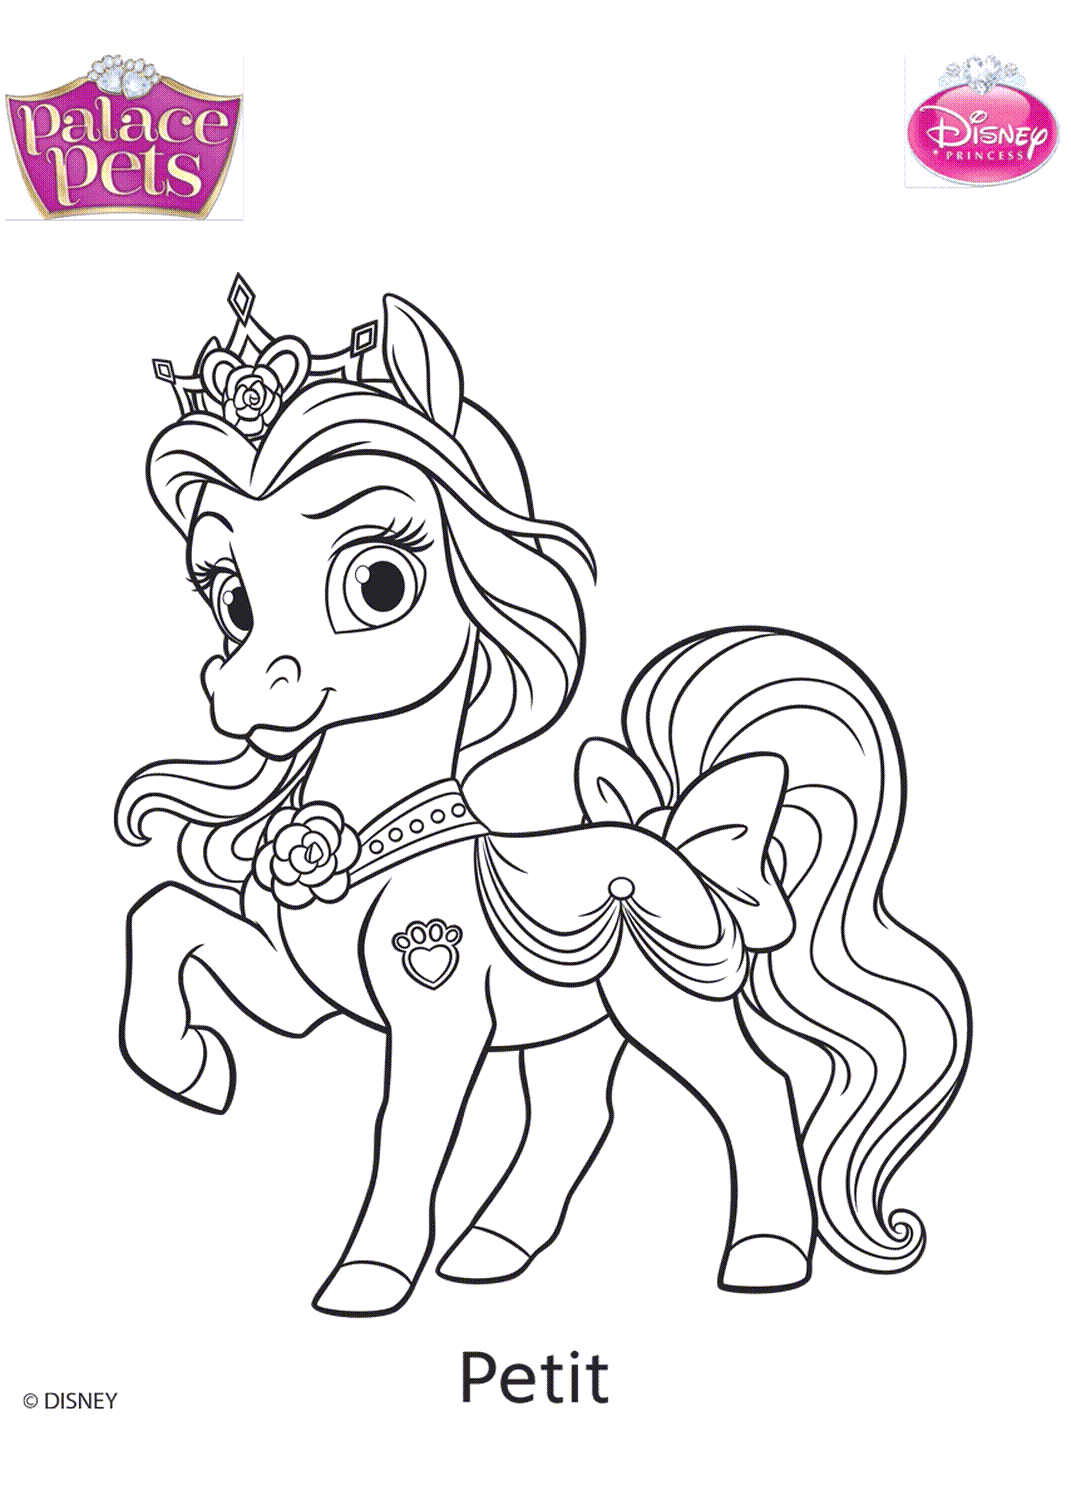 palace pets free coloring pages